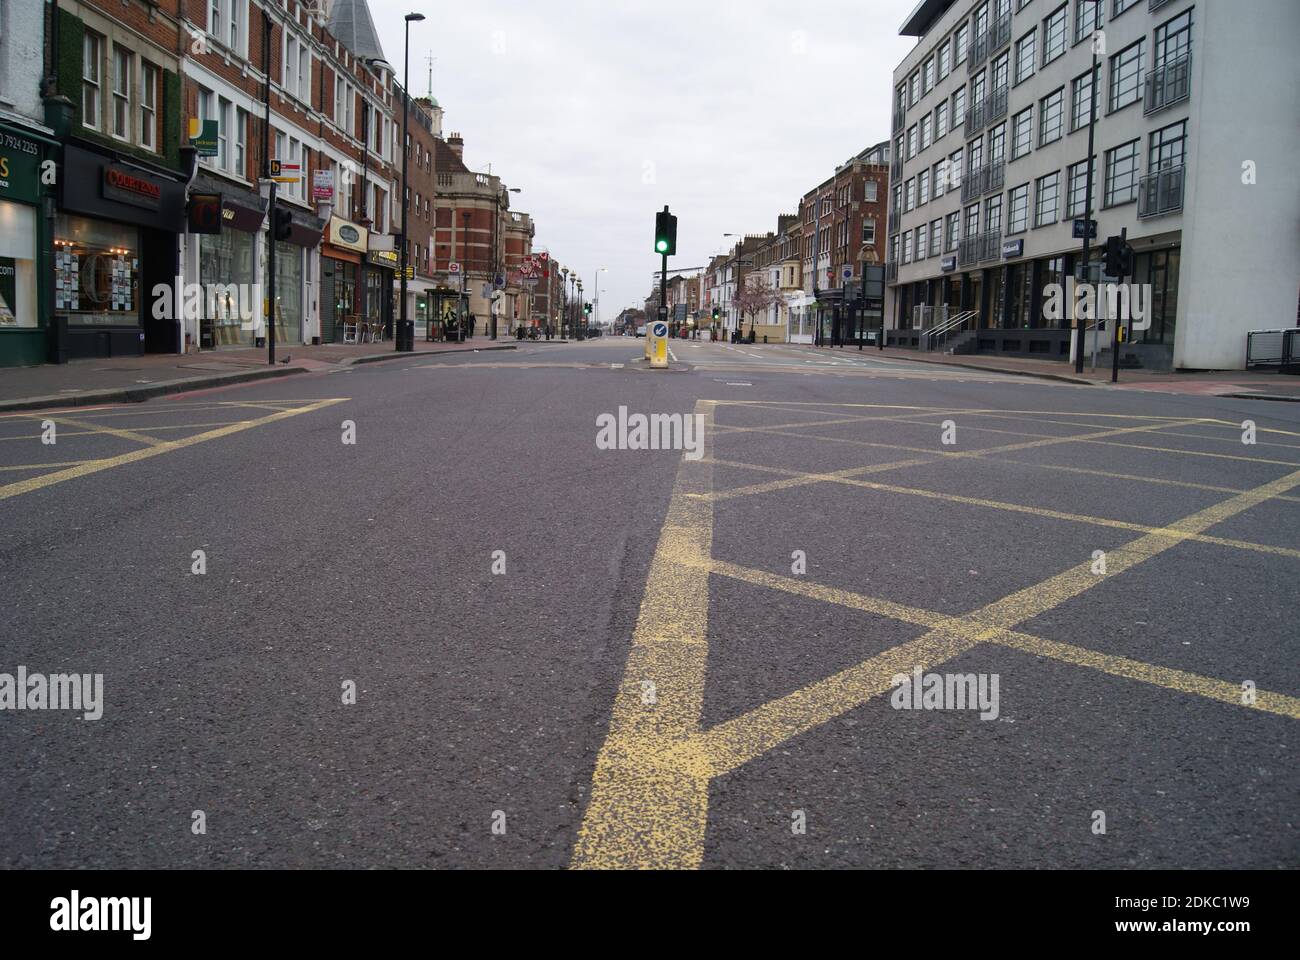 LODNON, UNITED KINGDOM - Aug 11, 2011: london the big city out there is magical Stock Photo